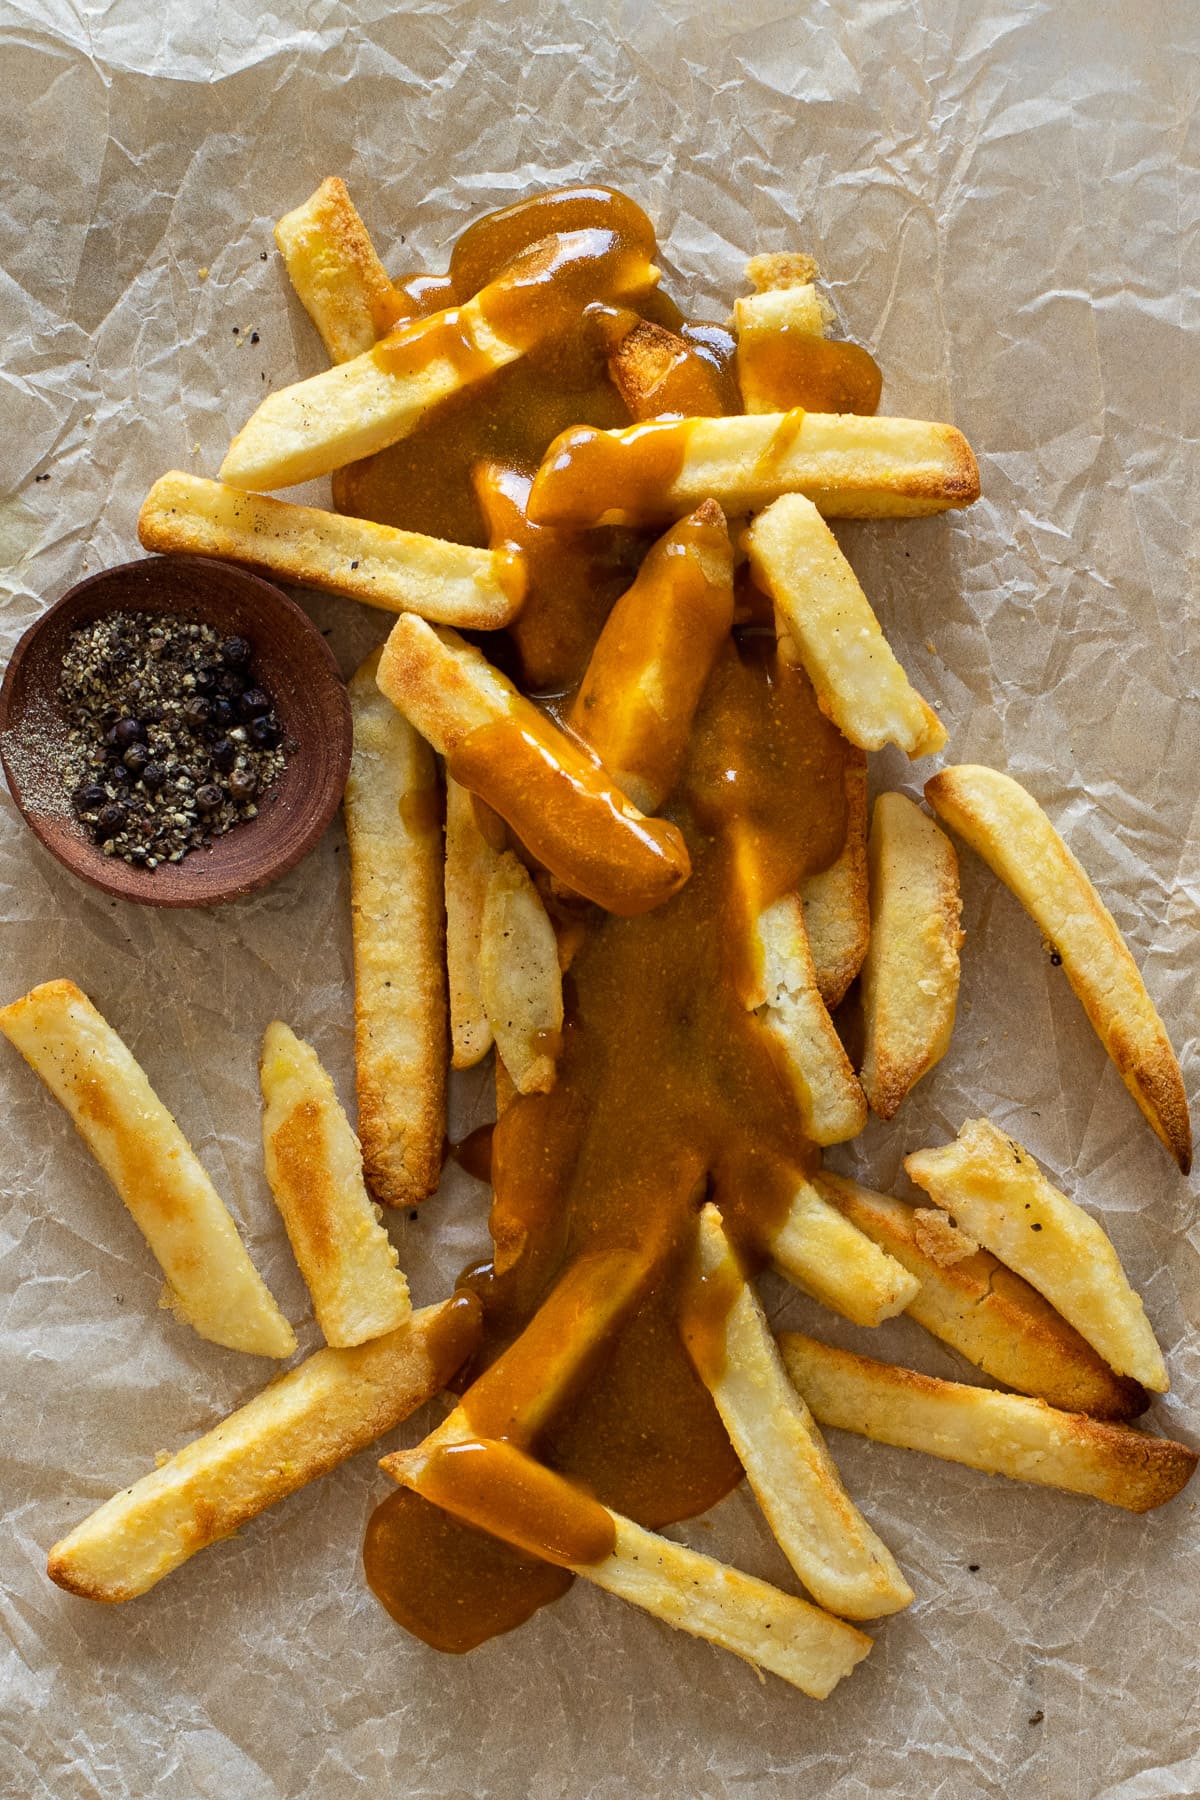 Chinese curry sauce over chips